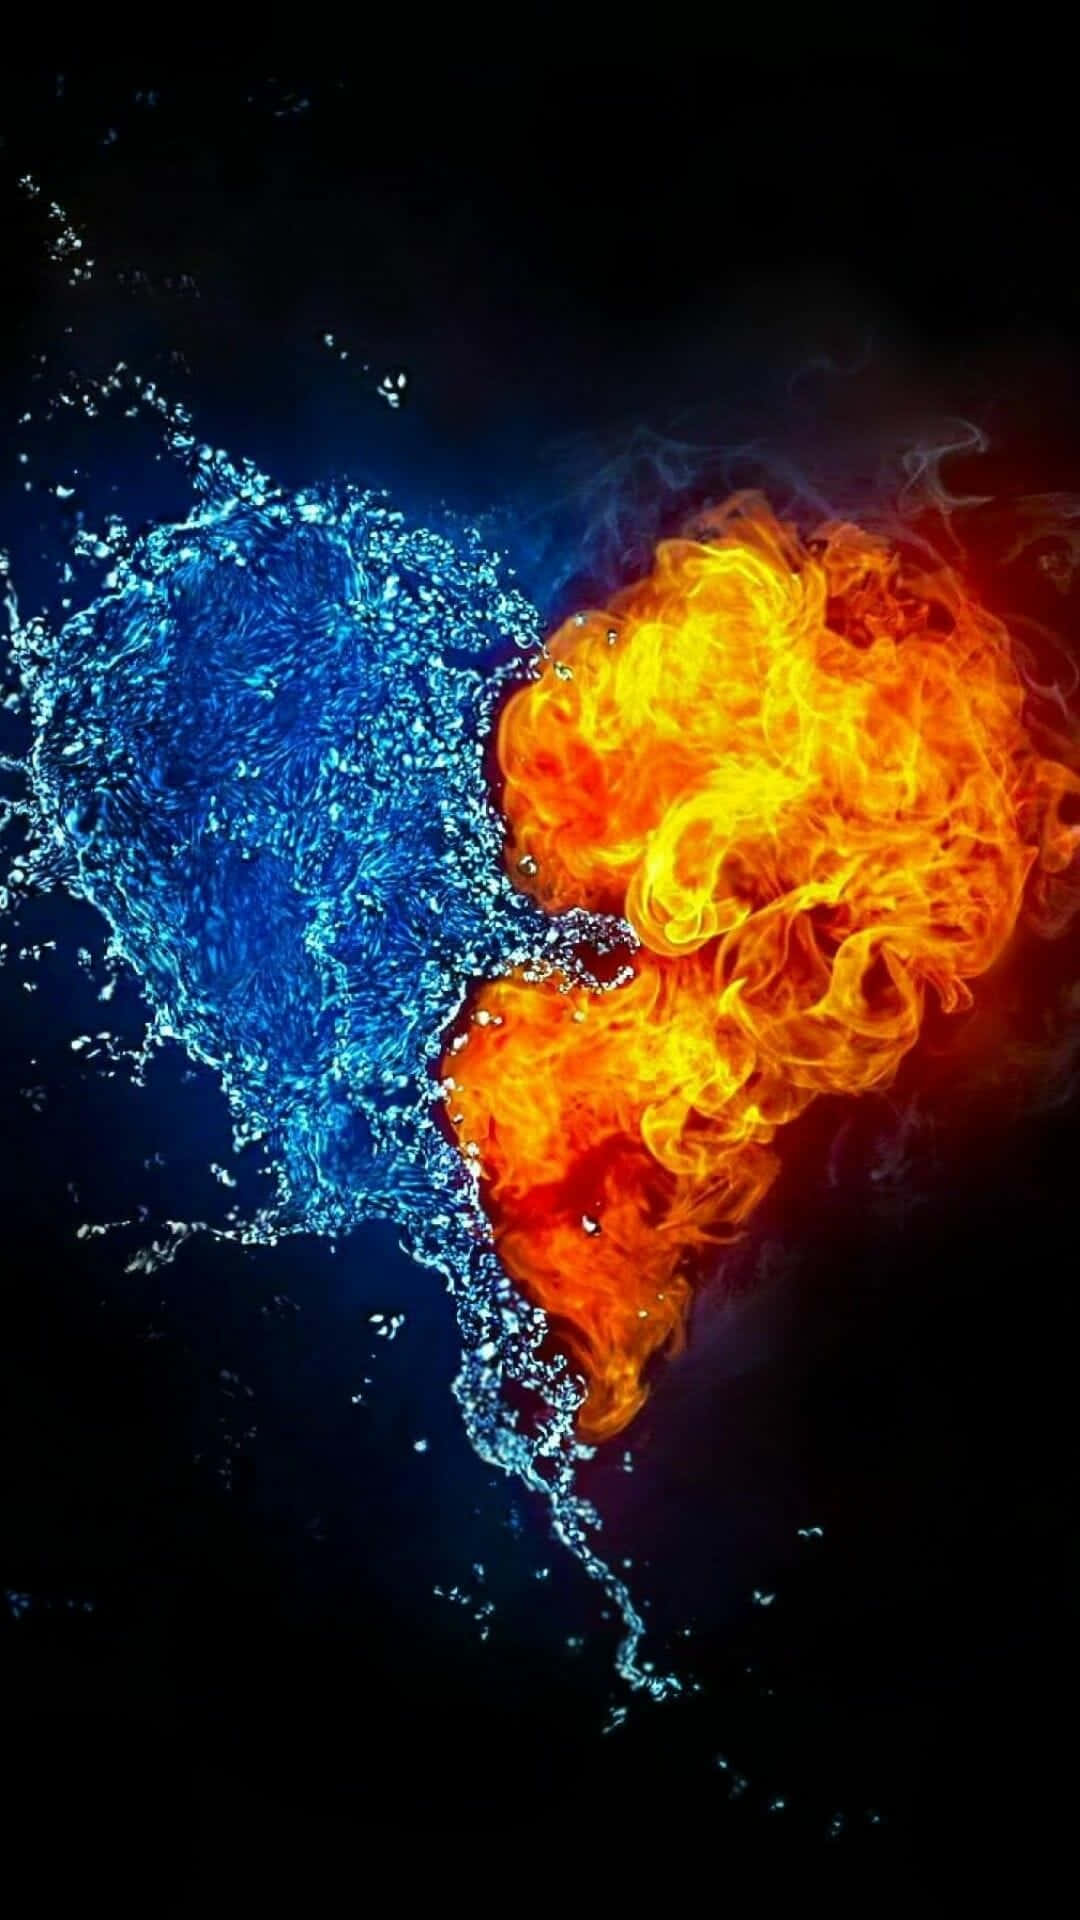 Enliven the Flames: Red and Blue Fire Wallpaper